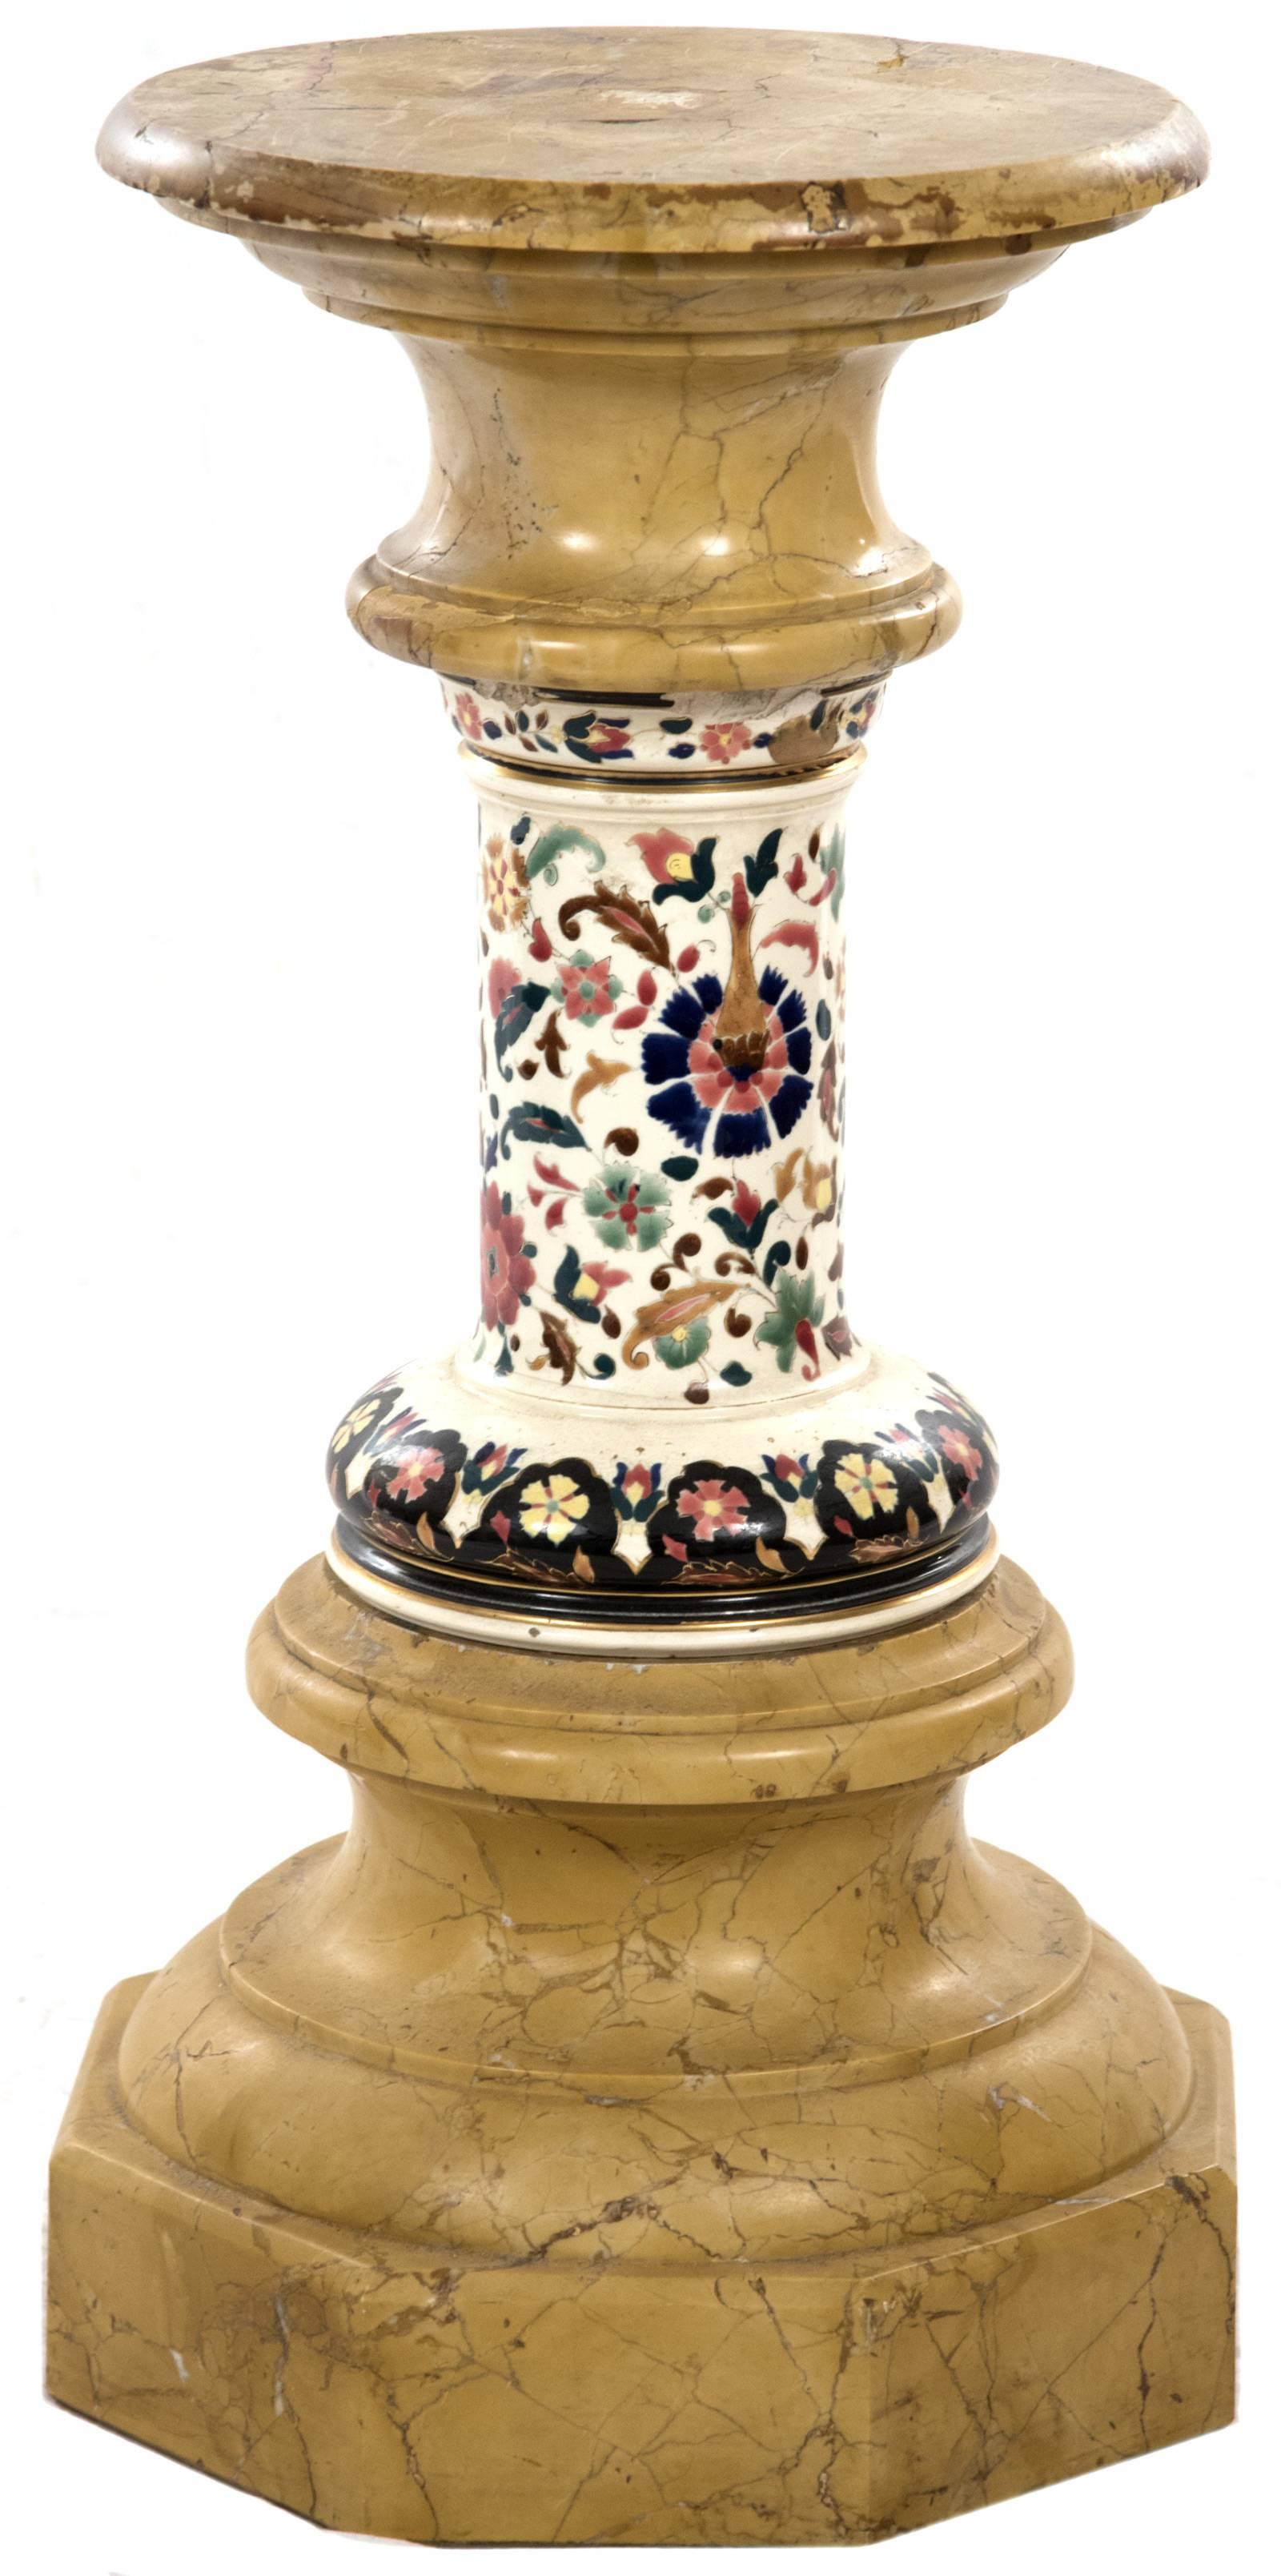 A pair of pedestals with round marble tops surmounting polychrome enamel scrolling floral and folate designs on a white ground, raised on a carved and stepped octagonal marble base.